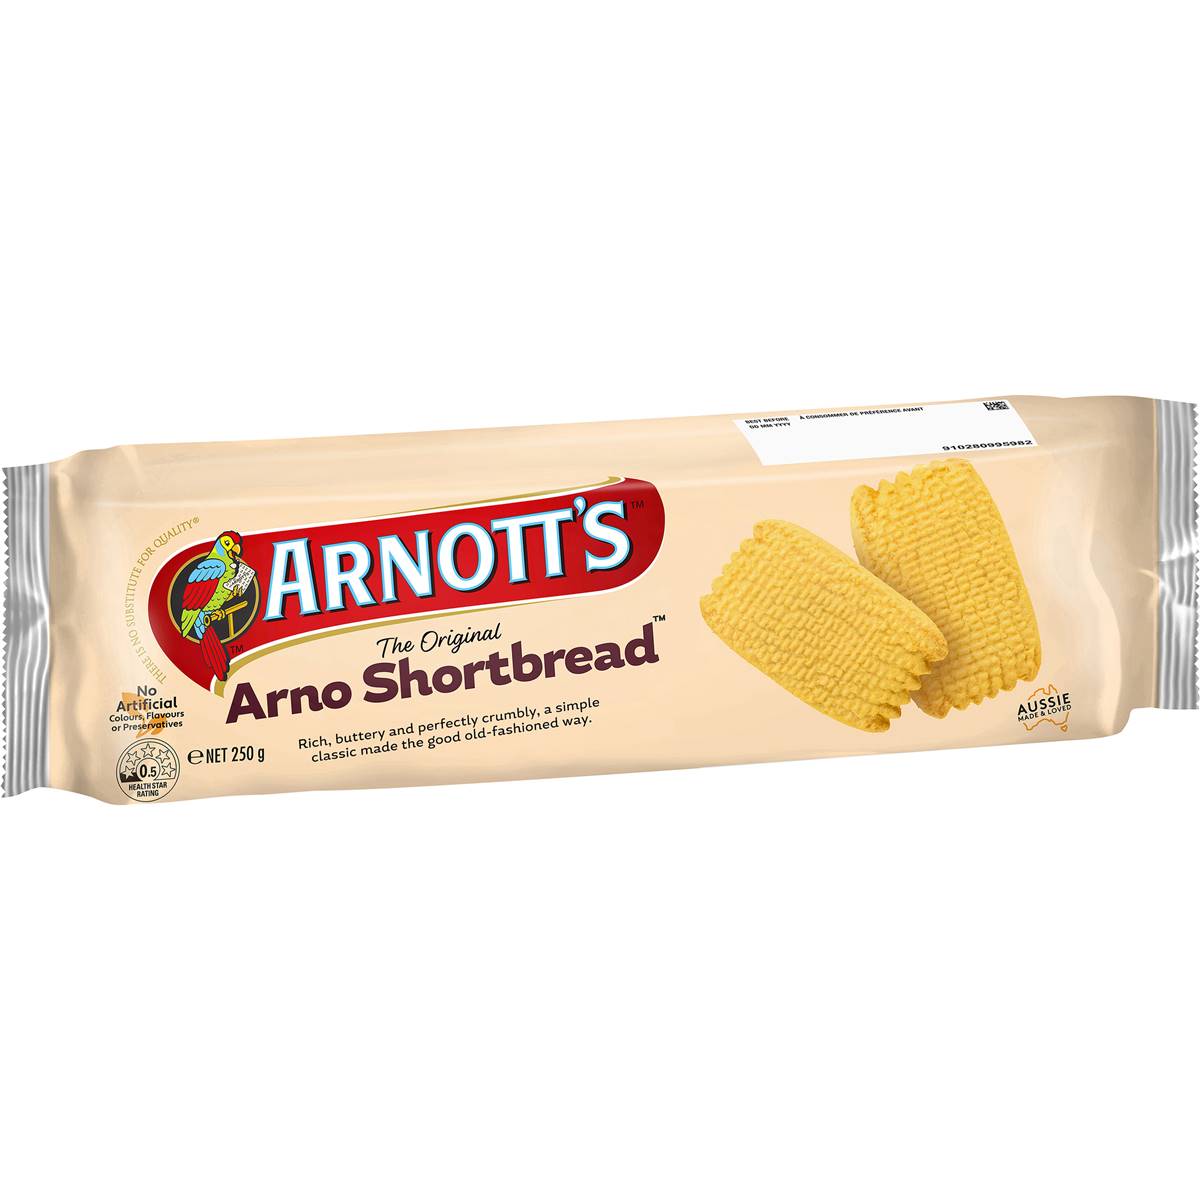 Calories In Arnotts Arno Shortbread Plain Biscuits Calcount 2084